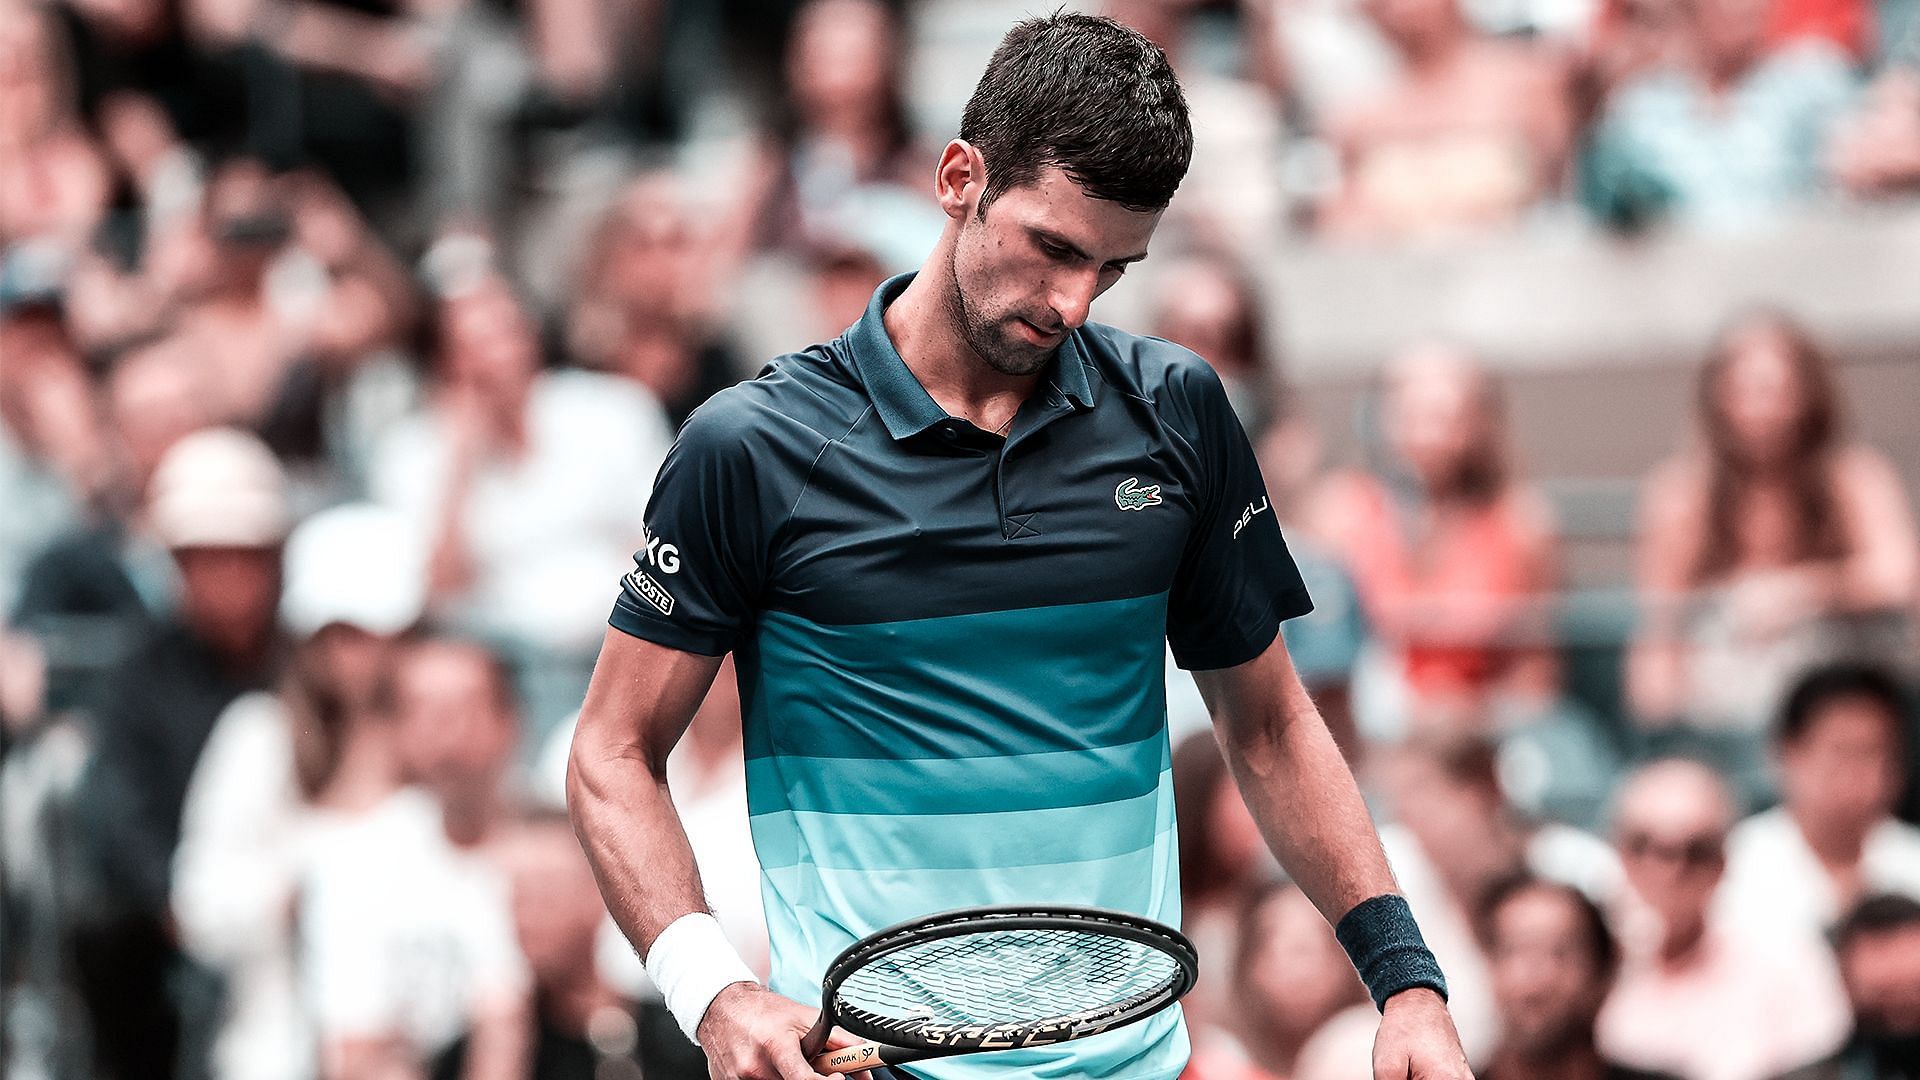 Novak Djokovic is the first player to win ATP titles on all three surfaces this season